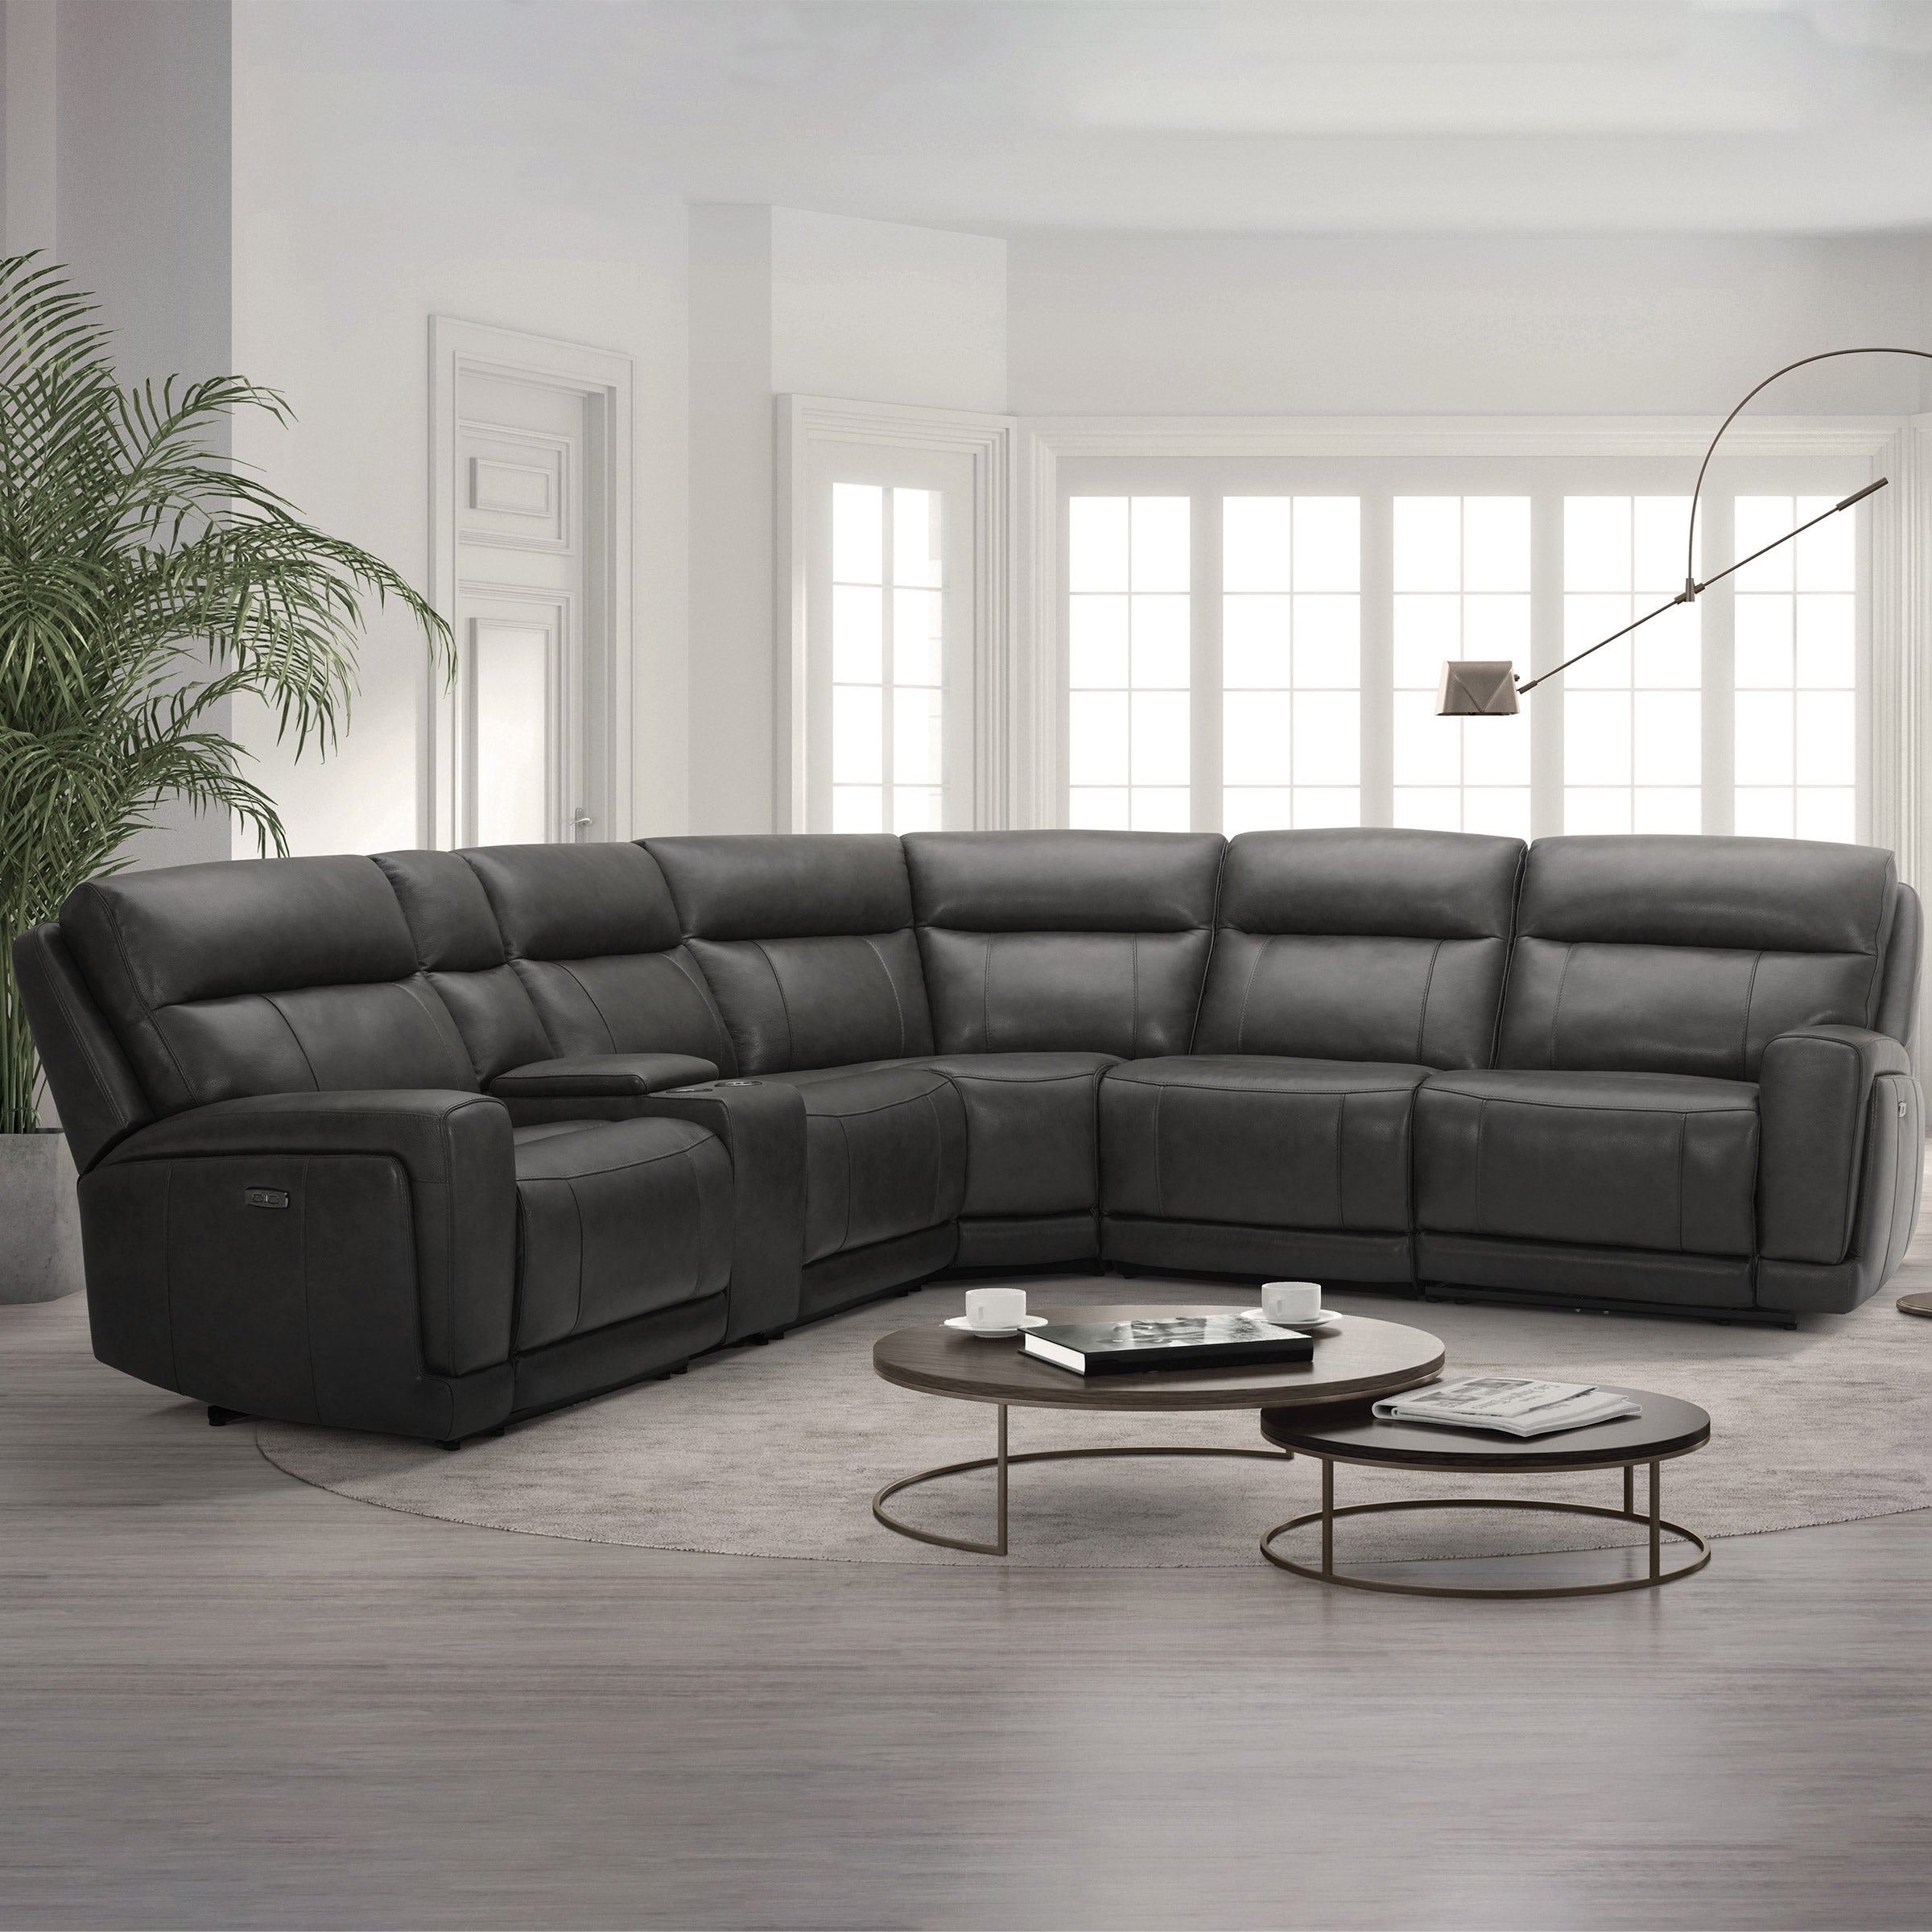 Lauretta 6-piece Leather Power Reclining Sectional with Power Headrests Image